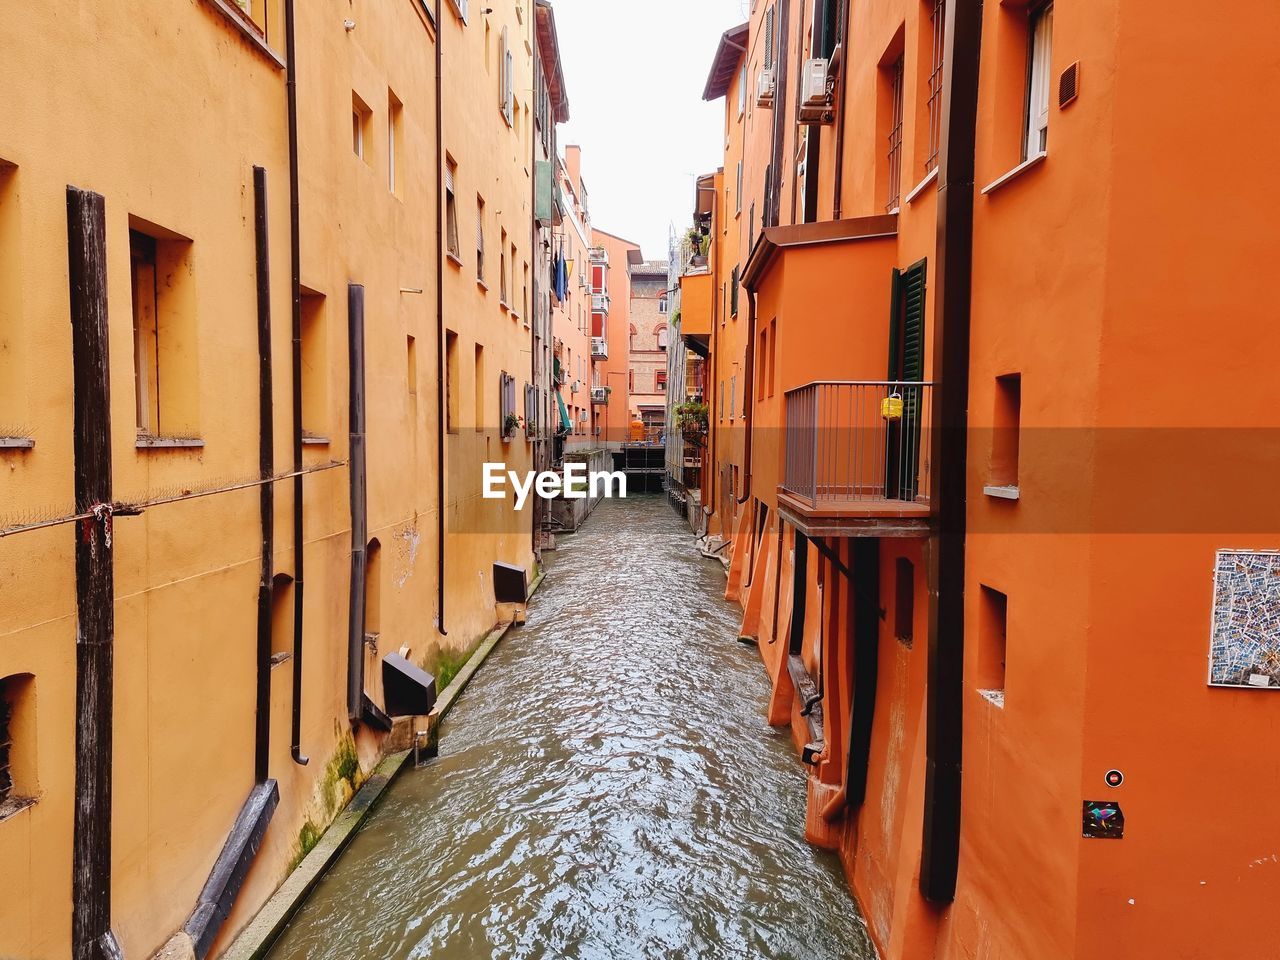 Narrow canal amidst buildings in city